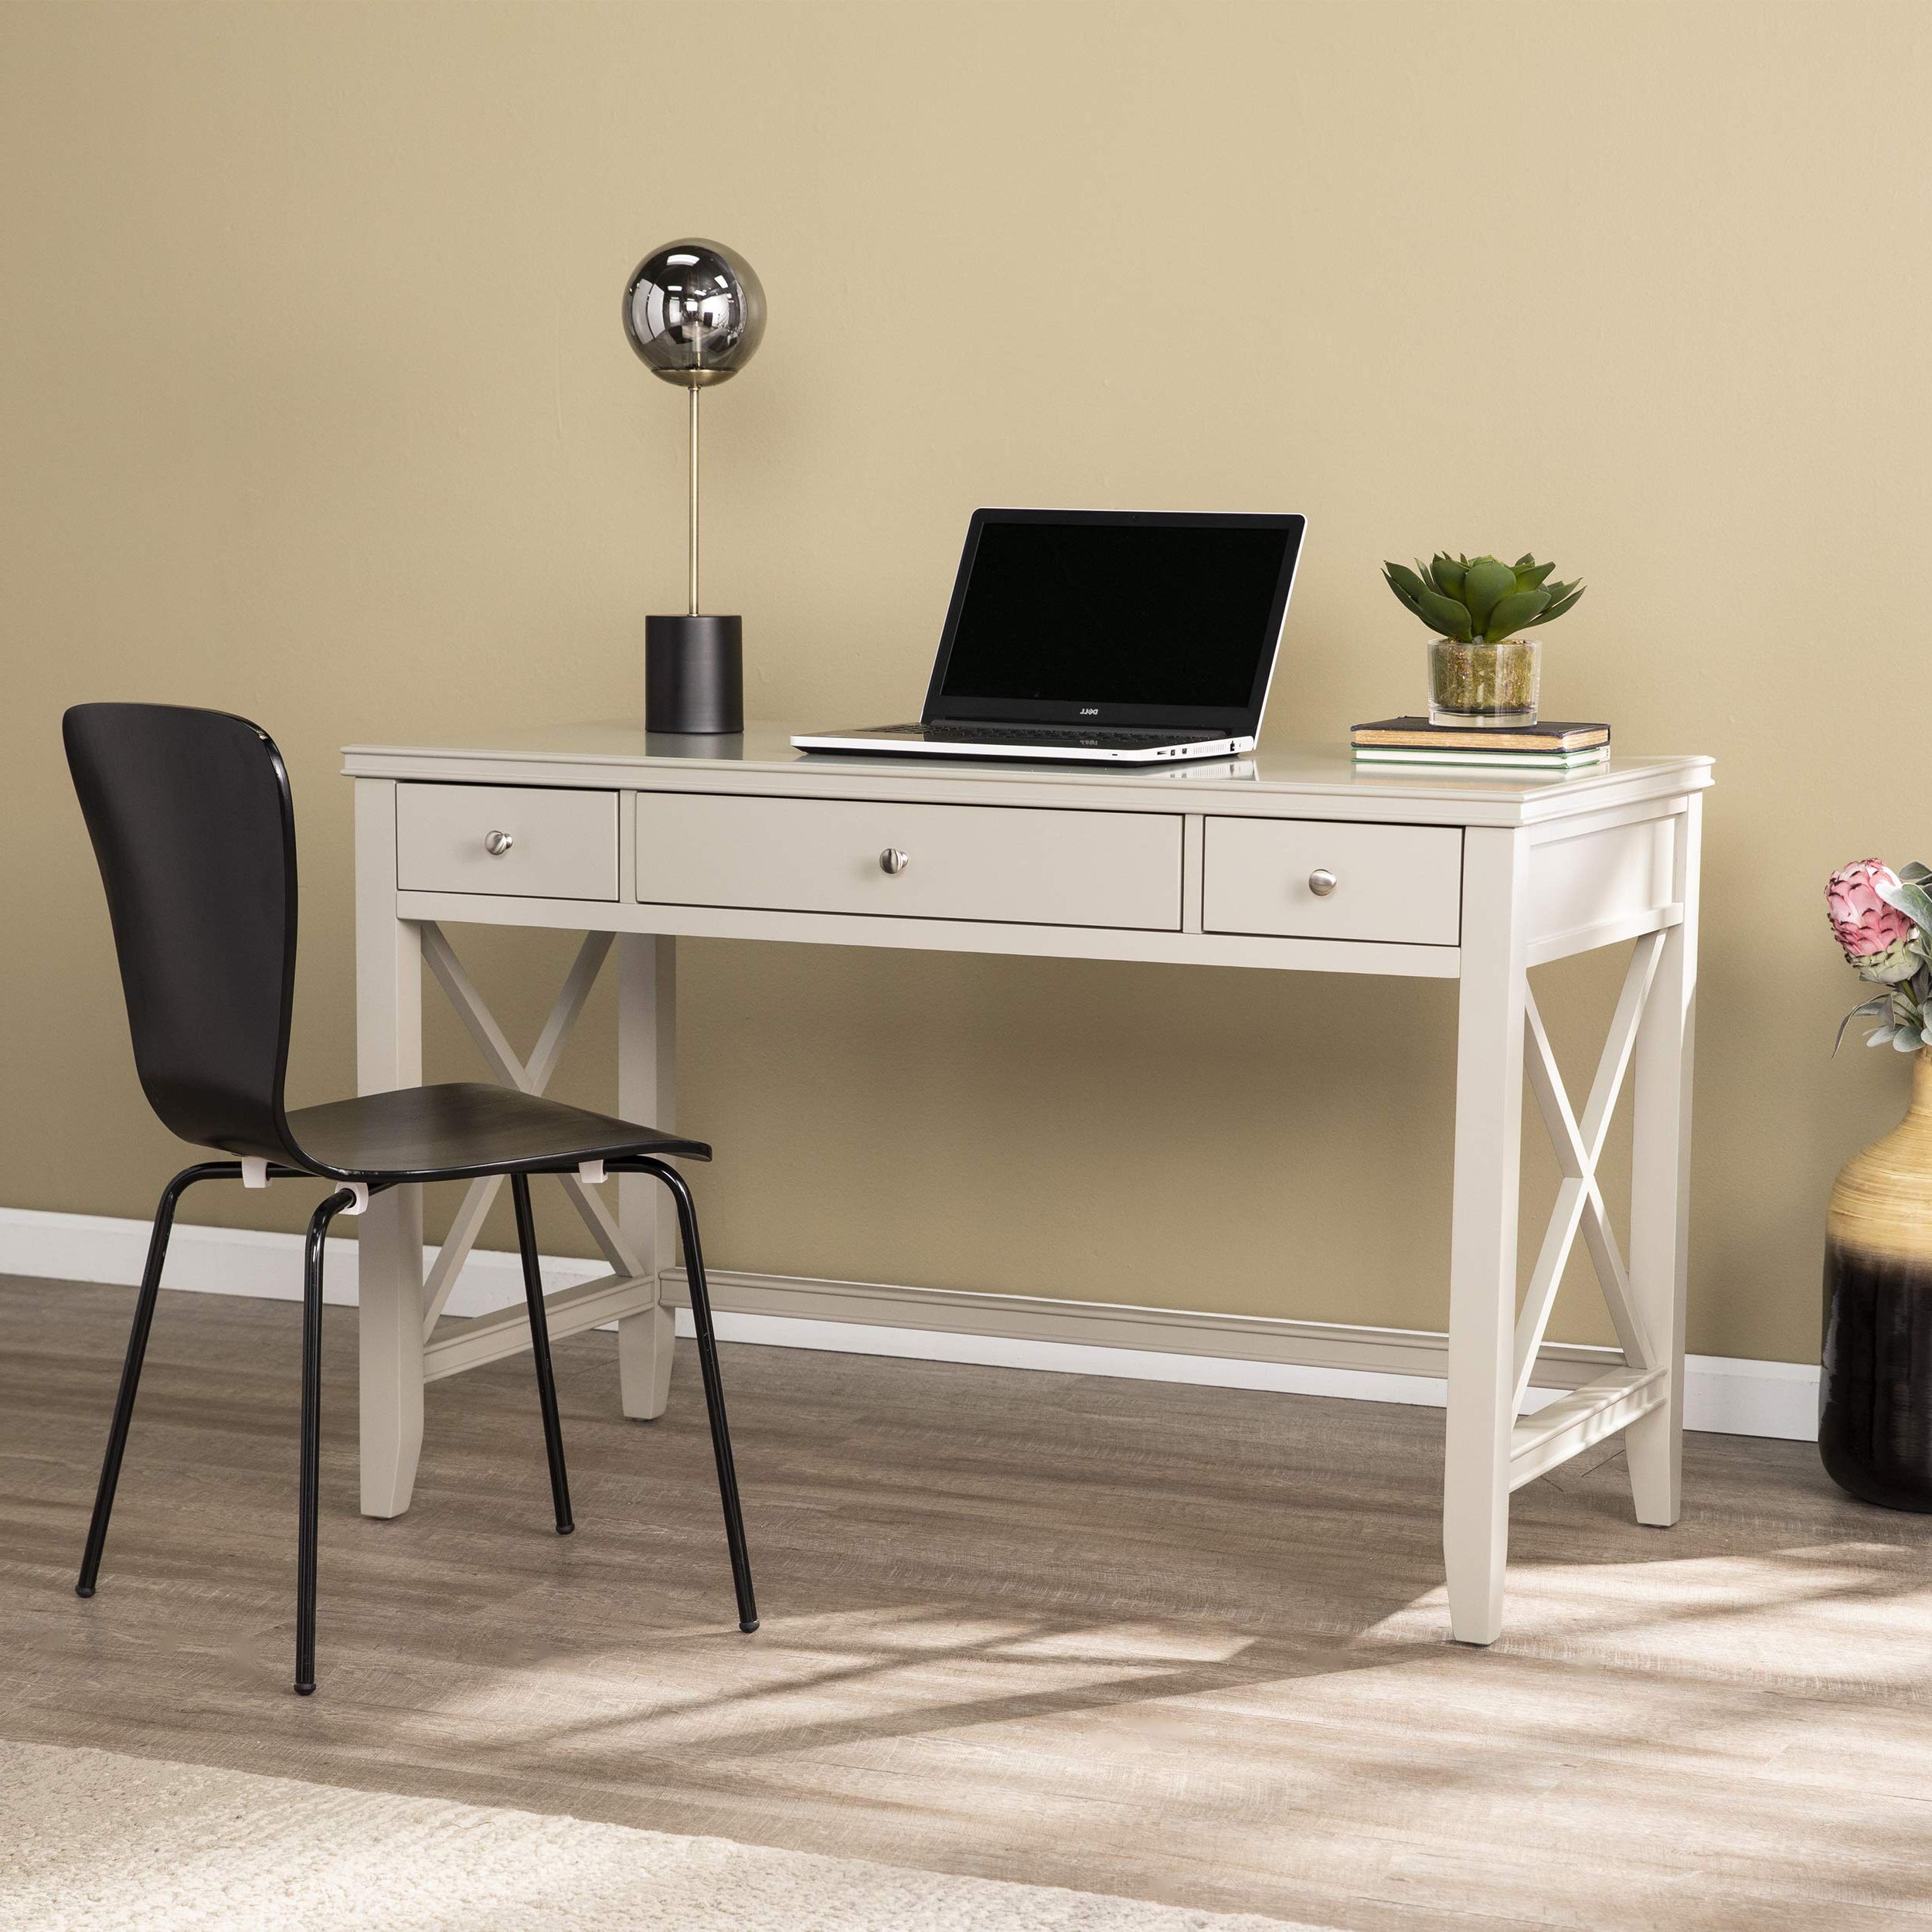 Widely Used Southern Enterprises Larksmill Coffee Tables For Amazon: Sei Furniture Larksmill Writing Desk, Gray, Brushed Silver :  Home & Kitchen (Photo 5 of 10)